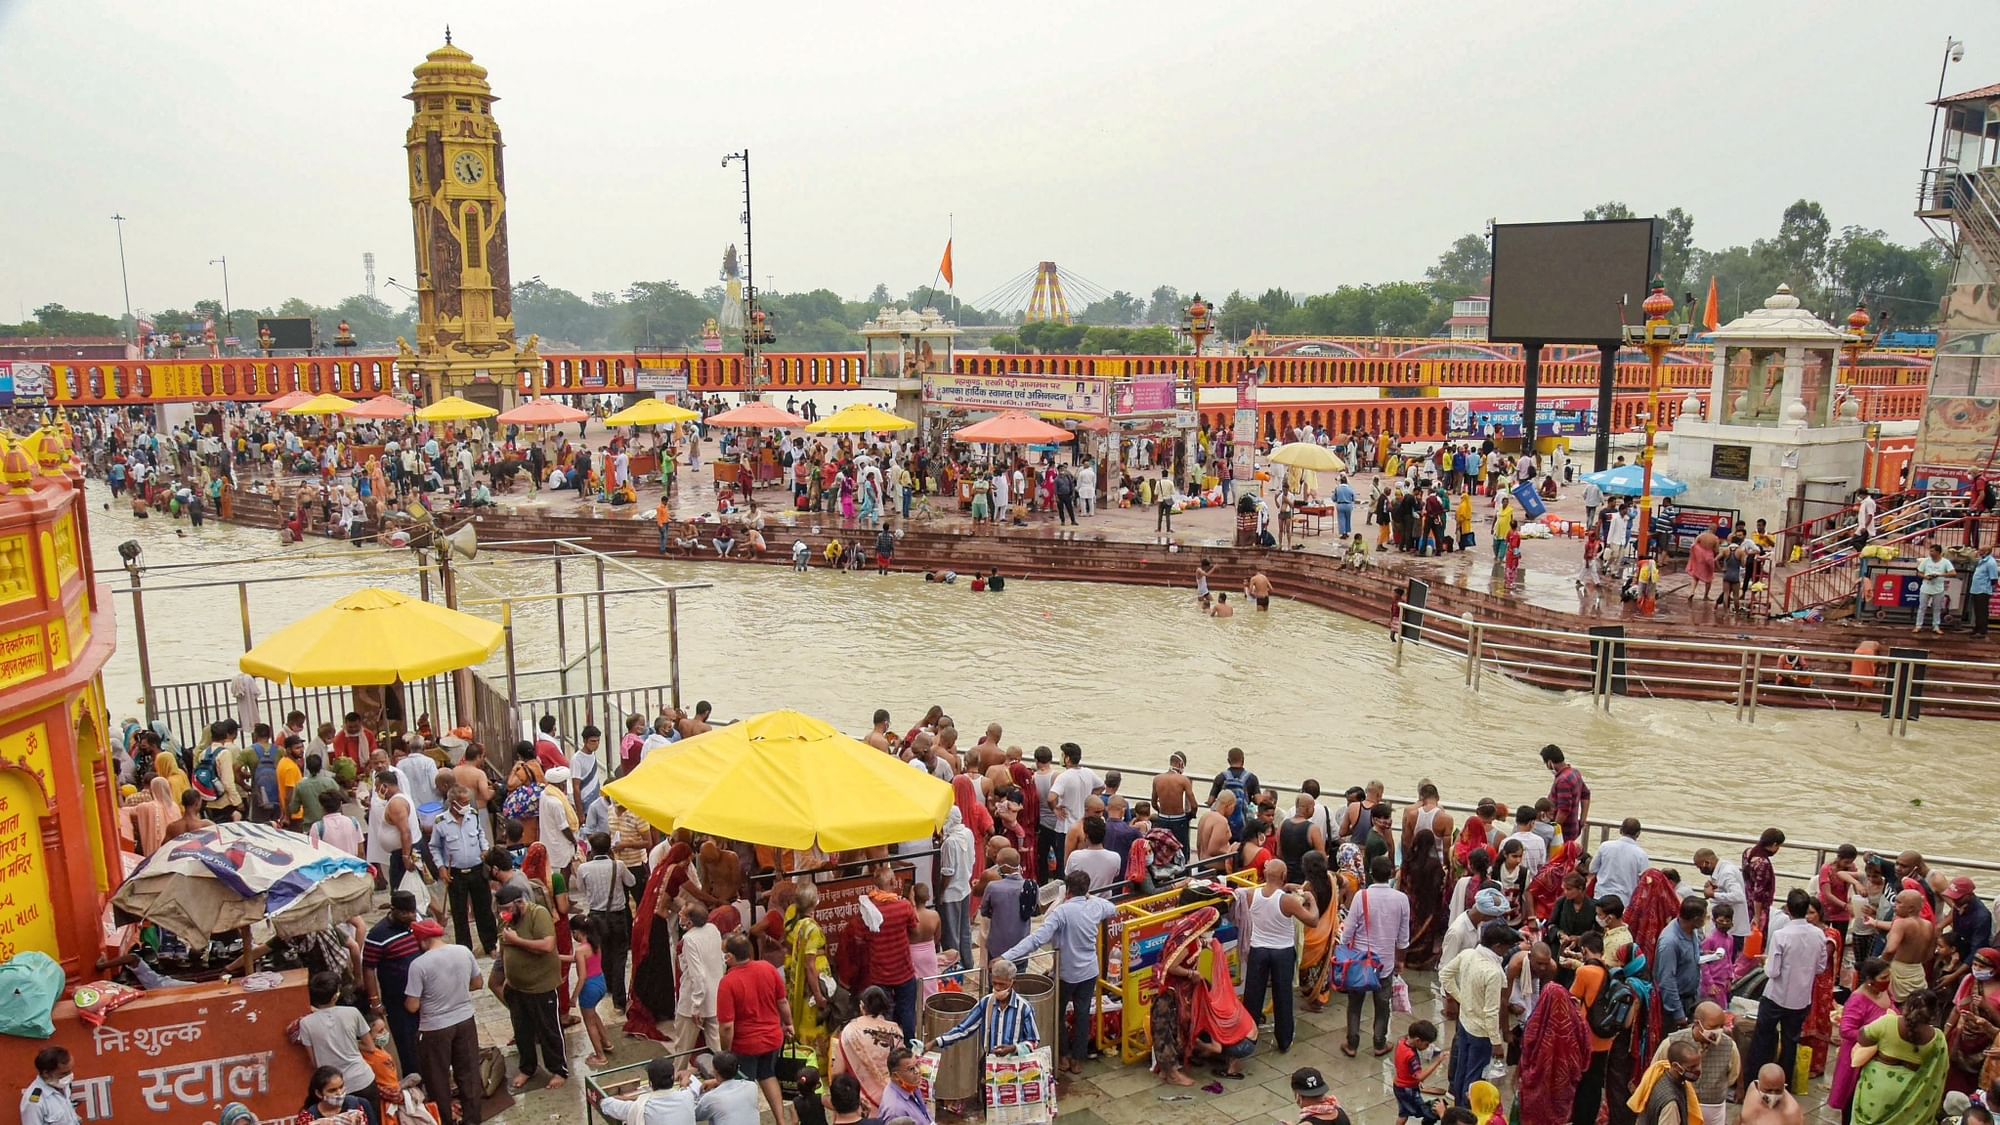 Flouting COVID protocols, devotees gather at the banks of the Ganga river on the occasion of ‘Vat Purnima’, at Har Ki Pauri ghat in Haridwar on Thursday, 10 June. Image used for representation only.